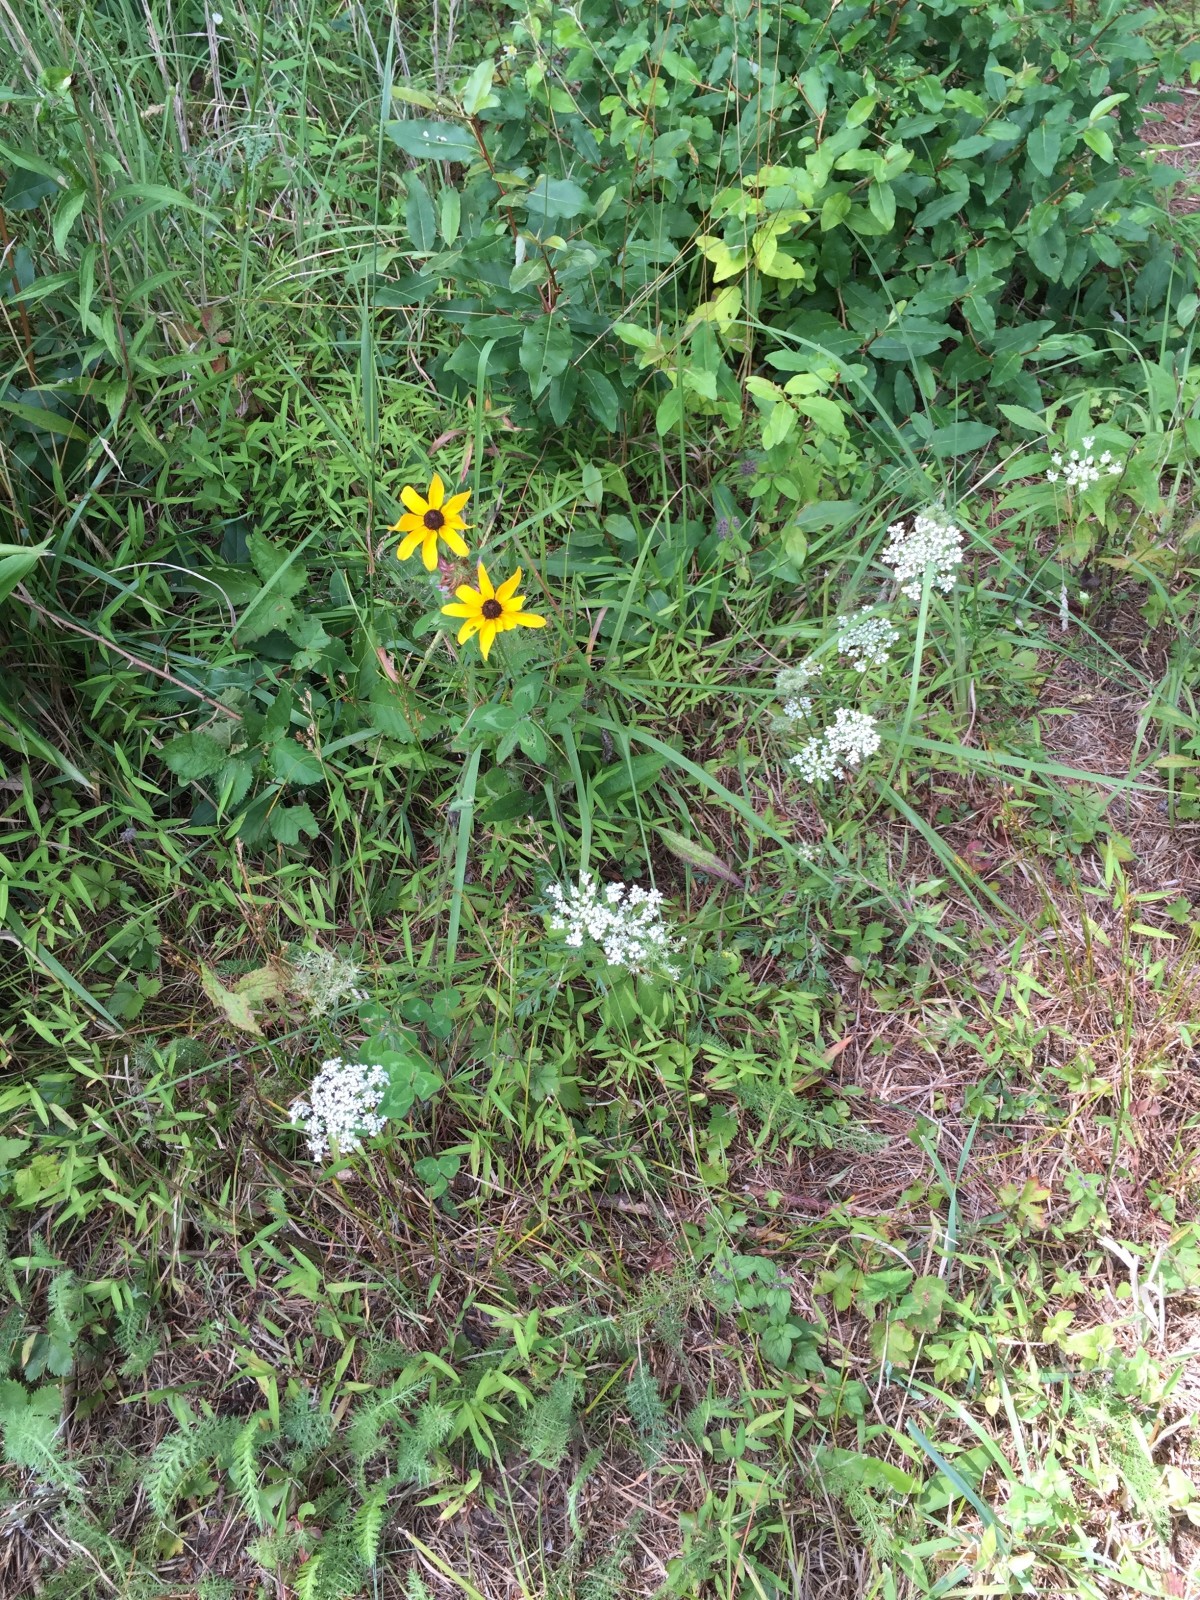 Mid-summer Queen Ann's lace and Black-Eyed Susan